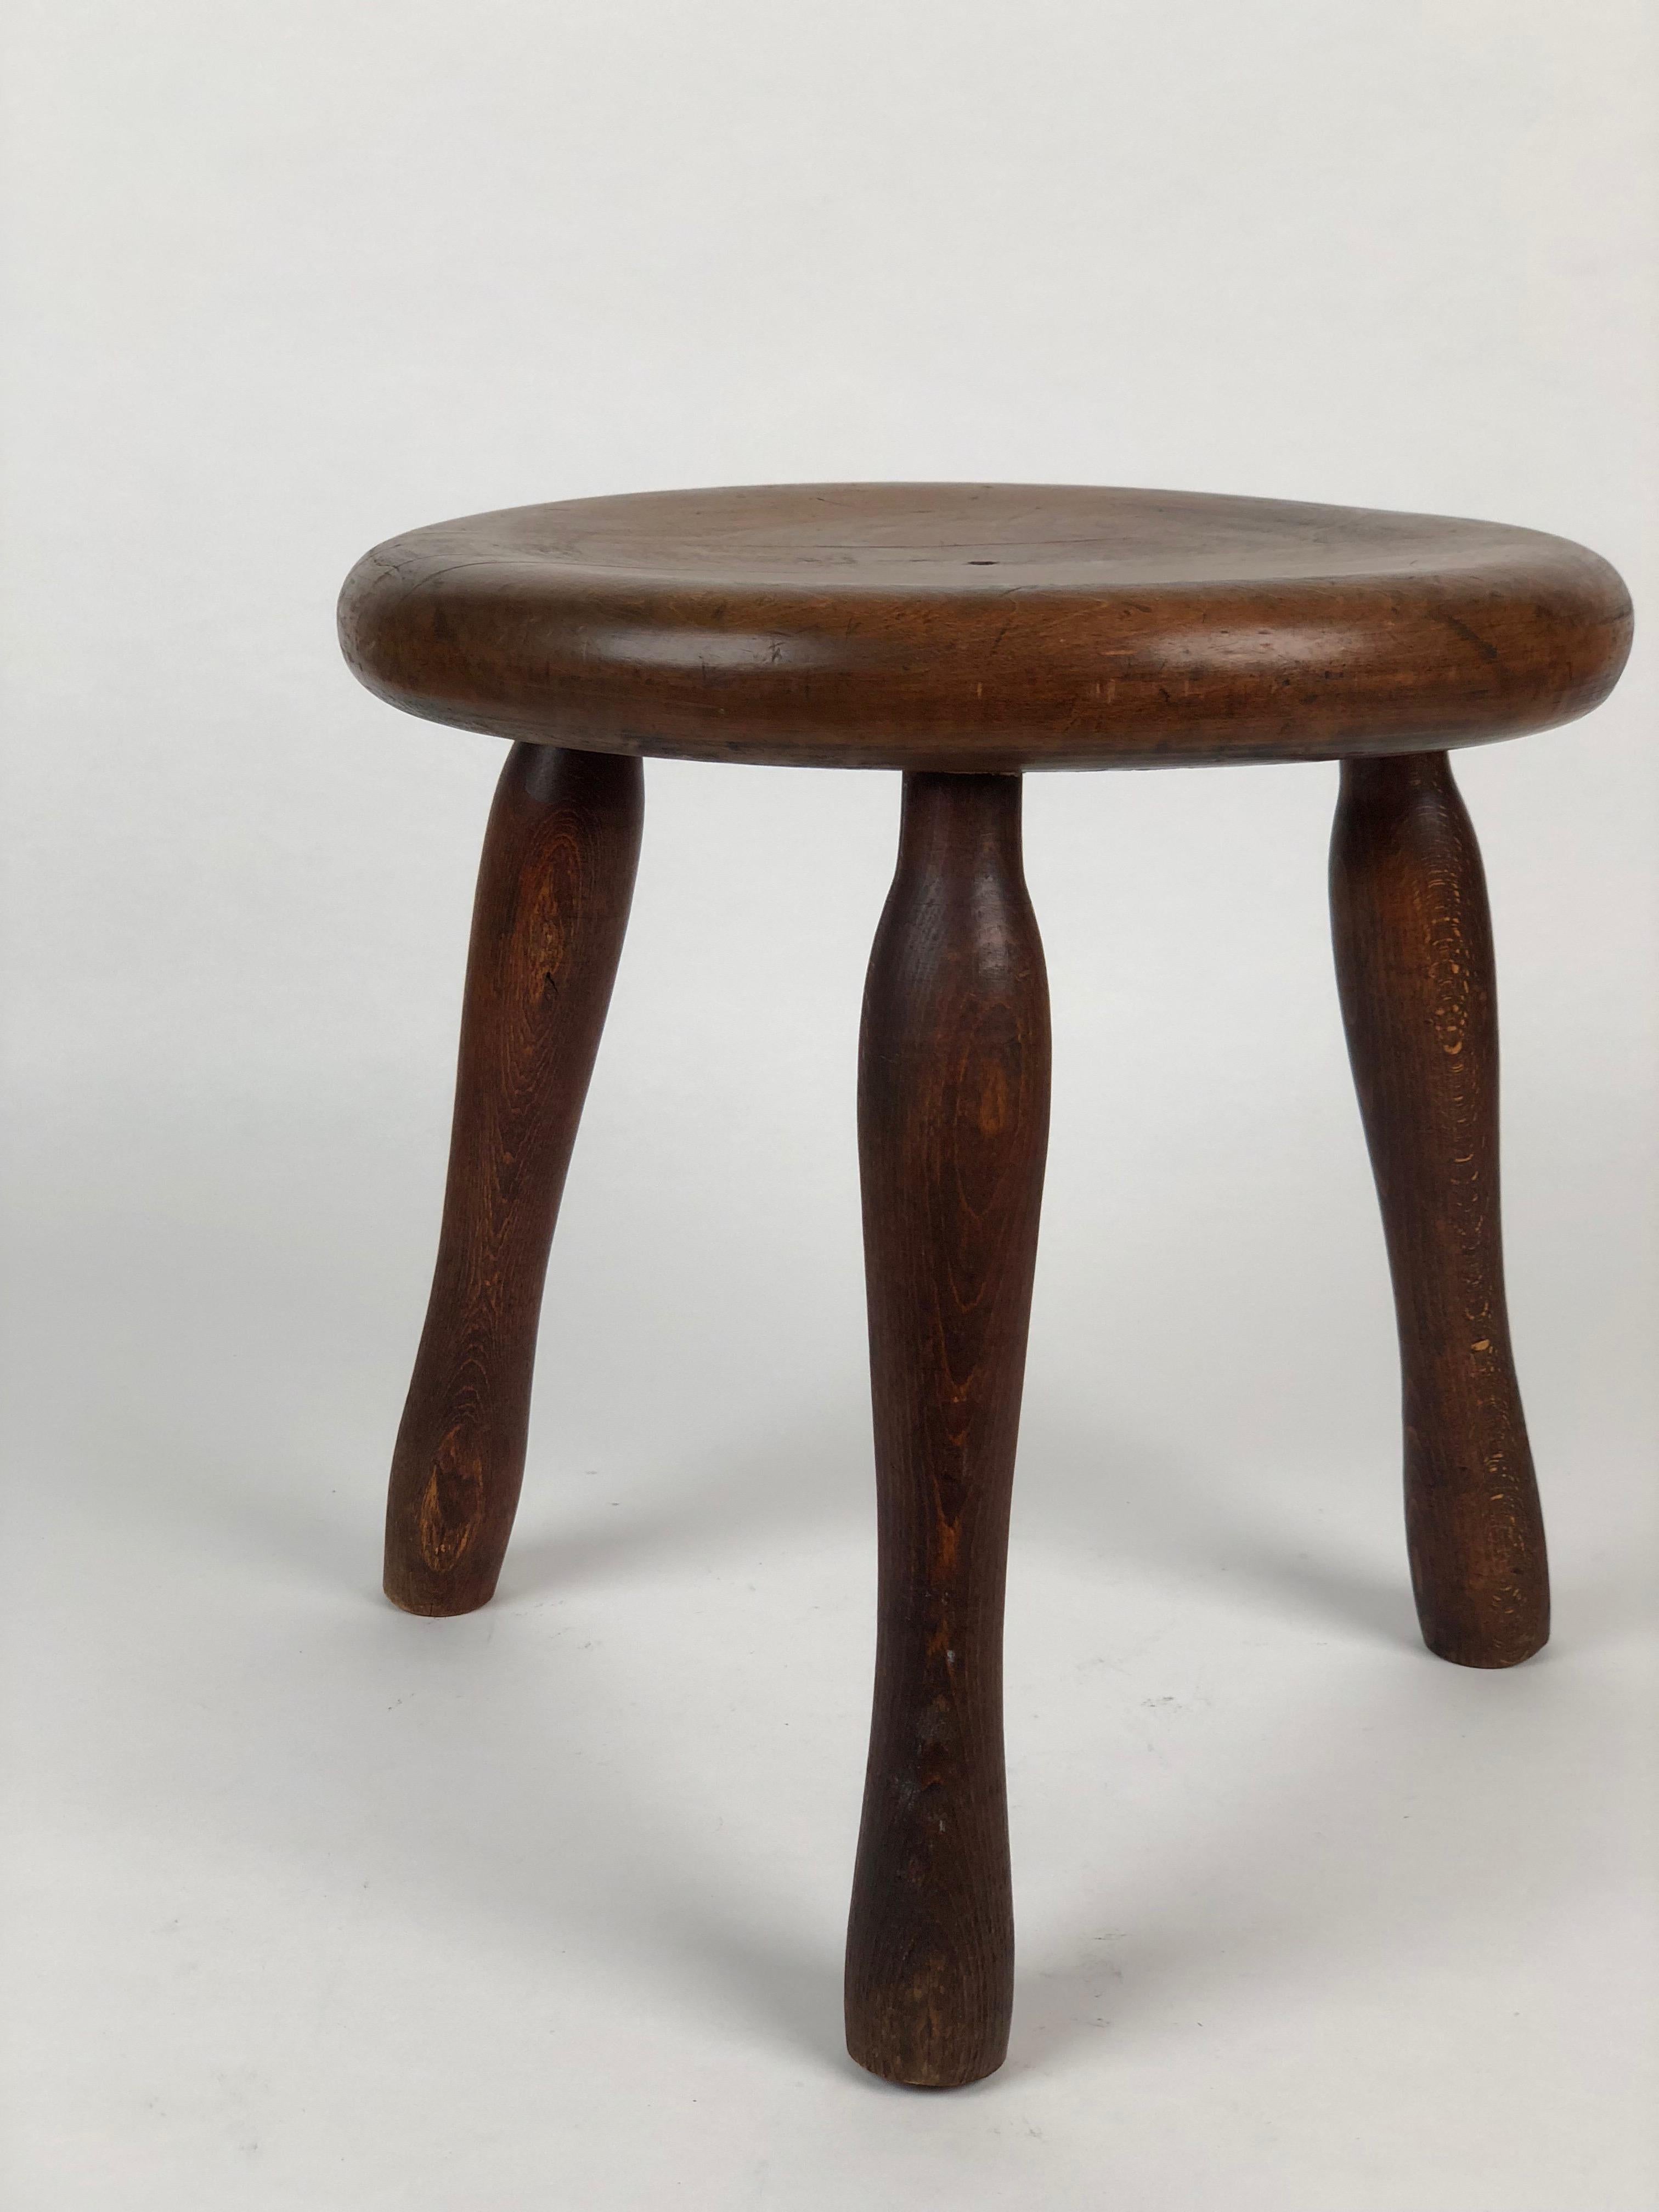 A small three-legged industrial stool with a seat made out of walnut and the three legs from stained beechwood.
The whole in the middle of the seat was for a cushion with a pin that went through the hole to keep it from slipping.
The finish is the